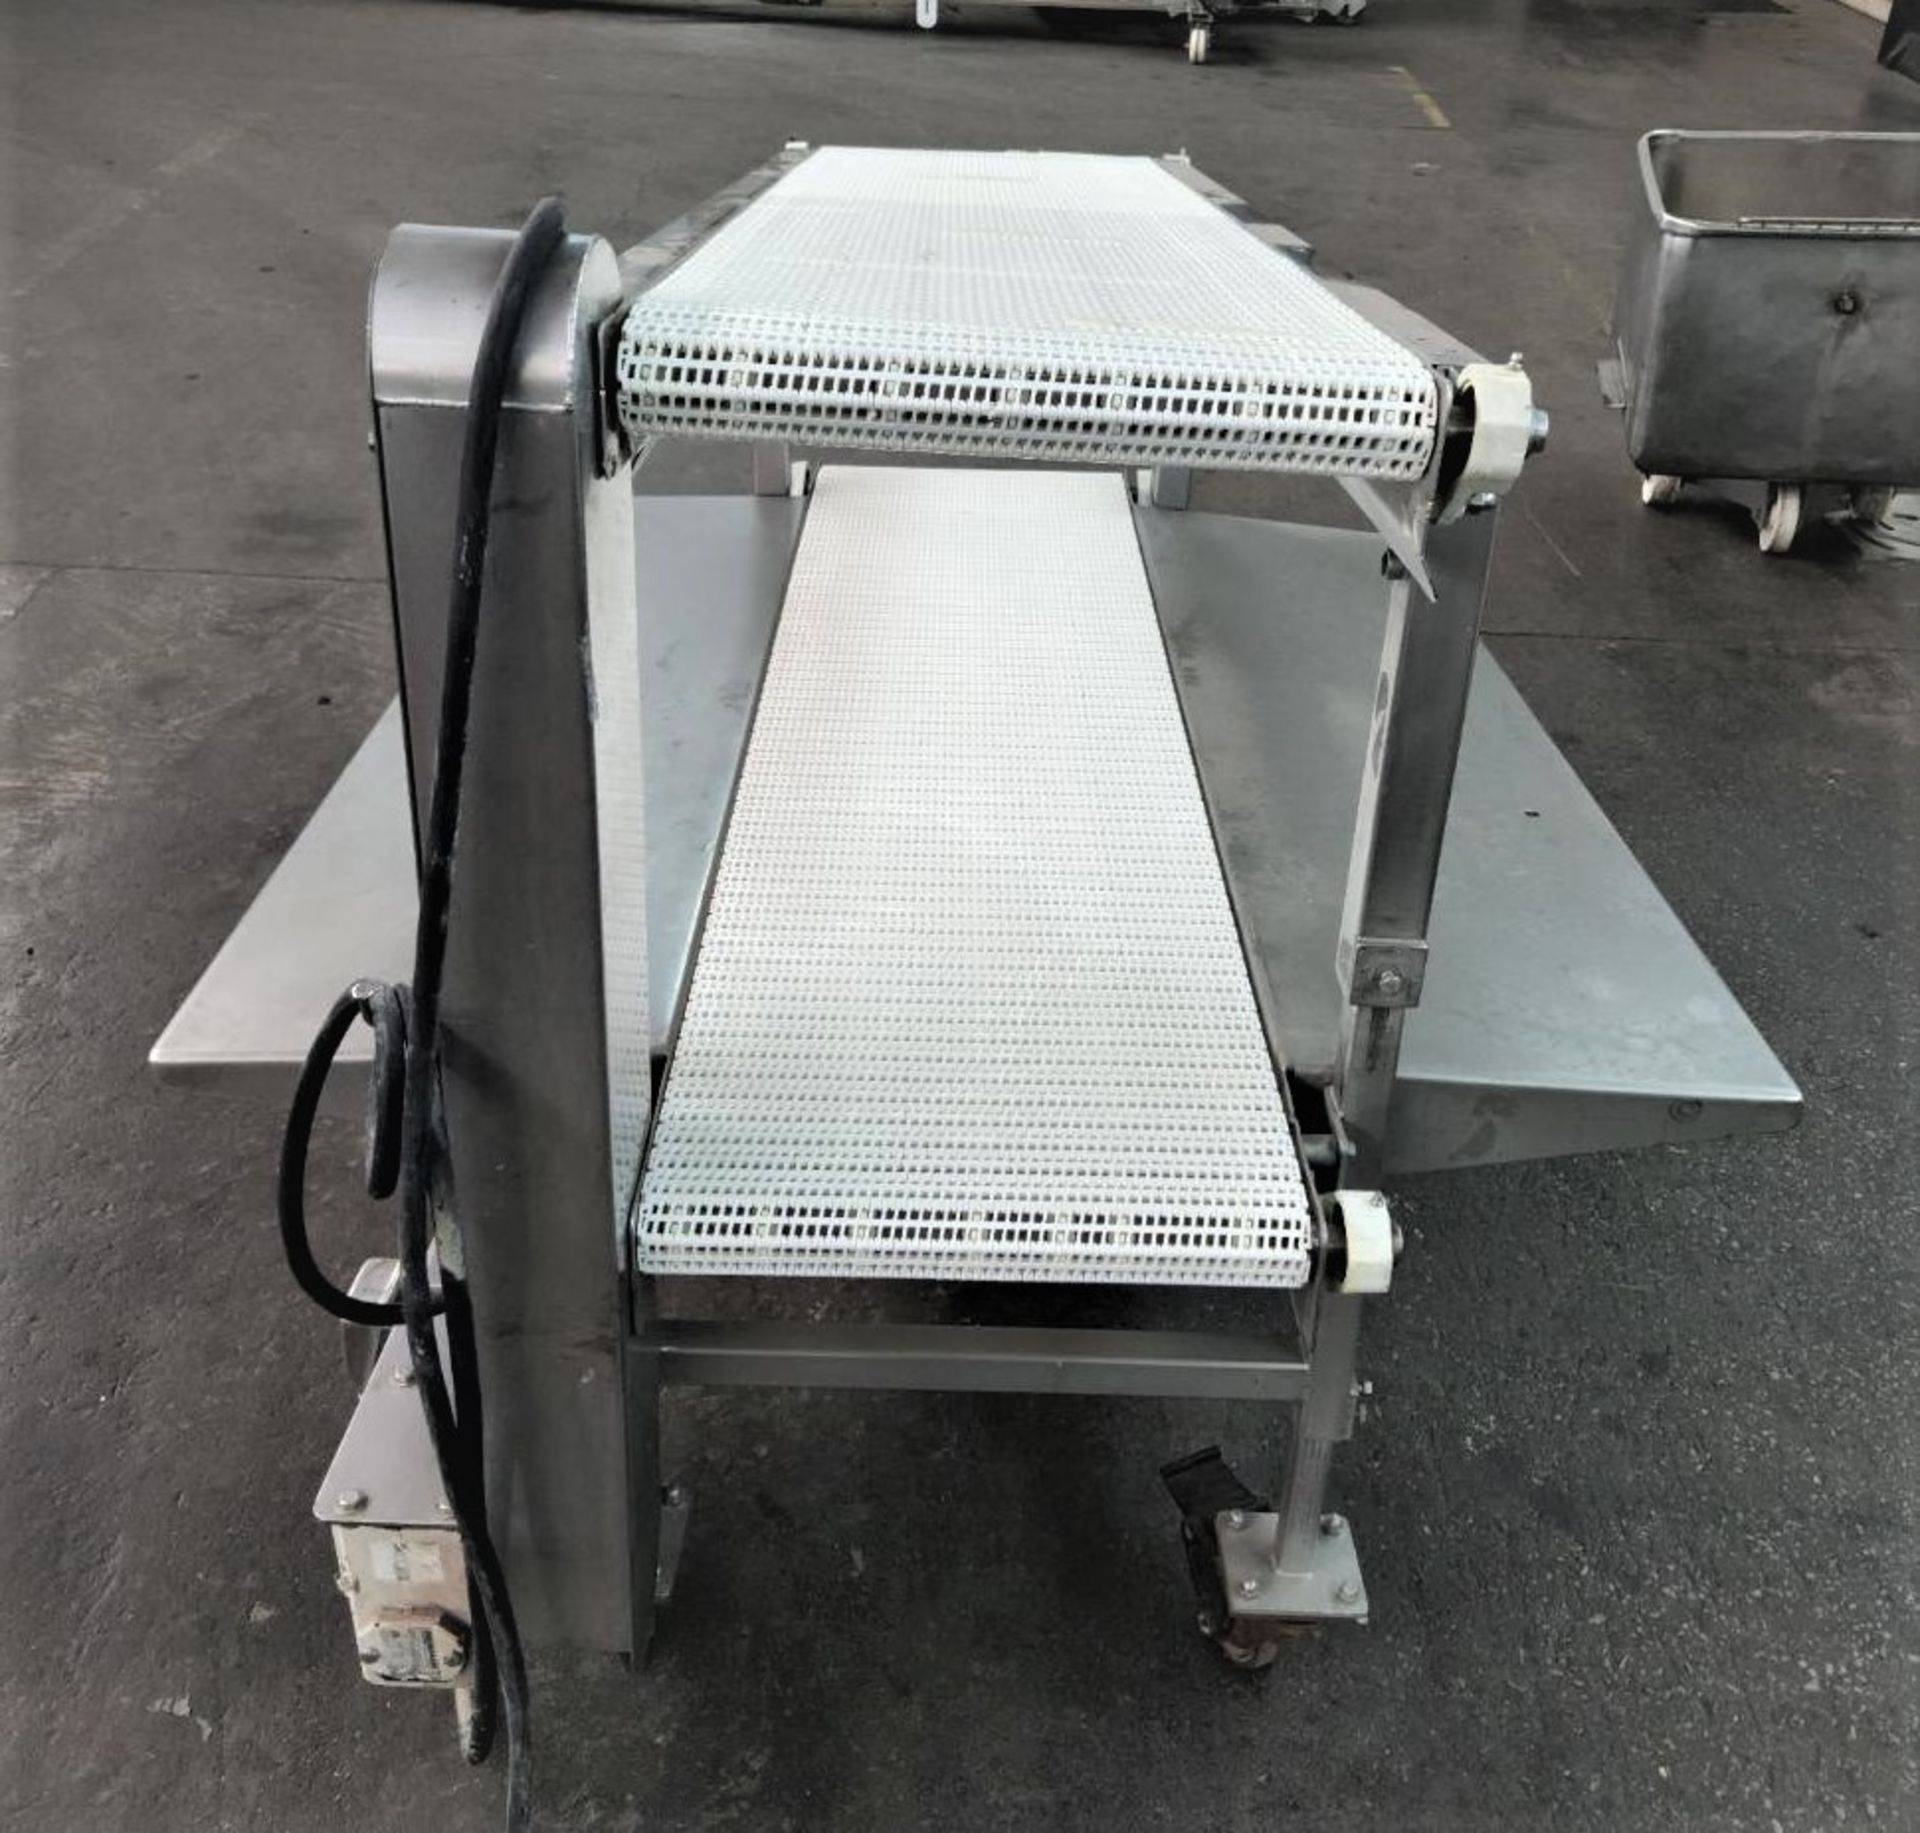 Dual 18" White Intralox Belt Conveyor Pack Off S/S Conveyor, Both Belts are 18" W x 72' Long, Tables - Image 3 of 5